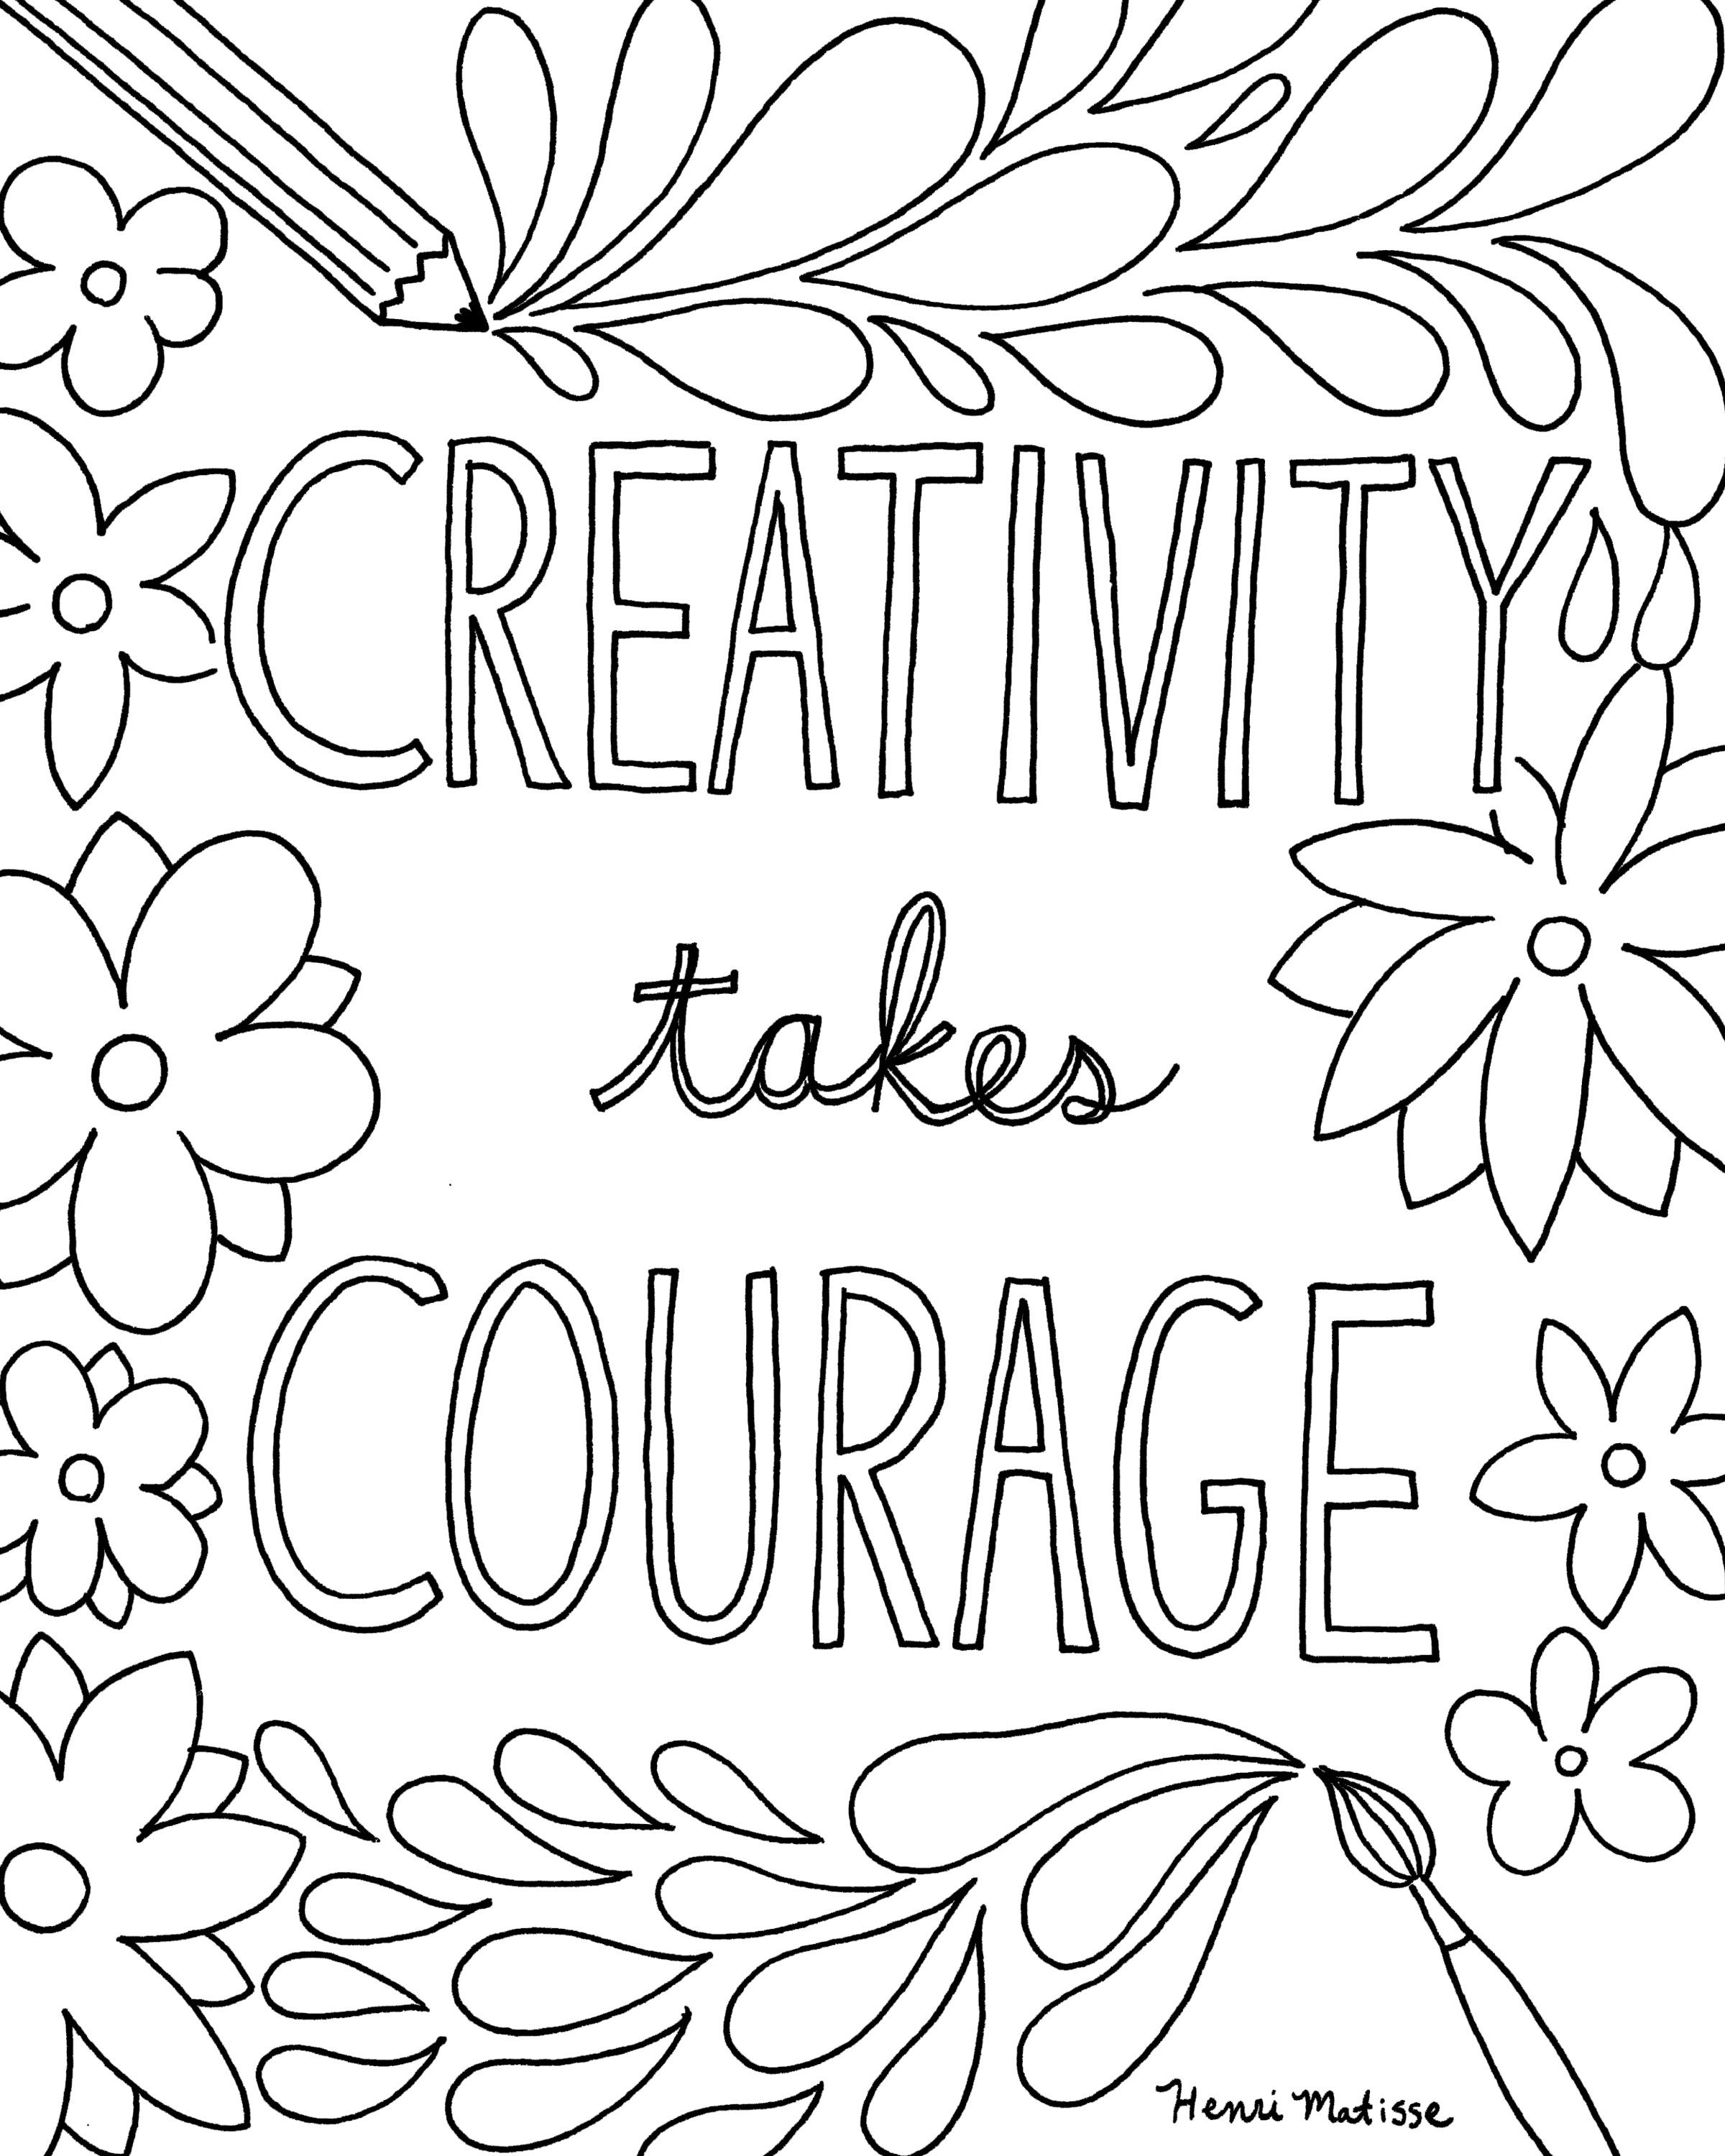 Free Printable Quote Coloring Pages For Grown-Ups | Drawing And - Free Printable Quote Coloring Pages For Adults